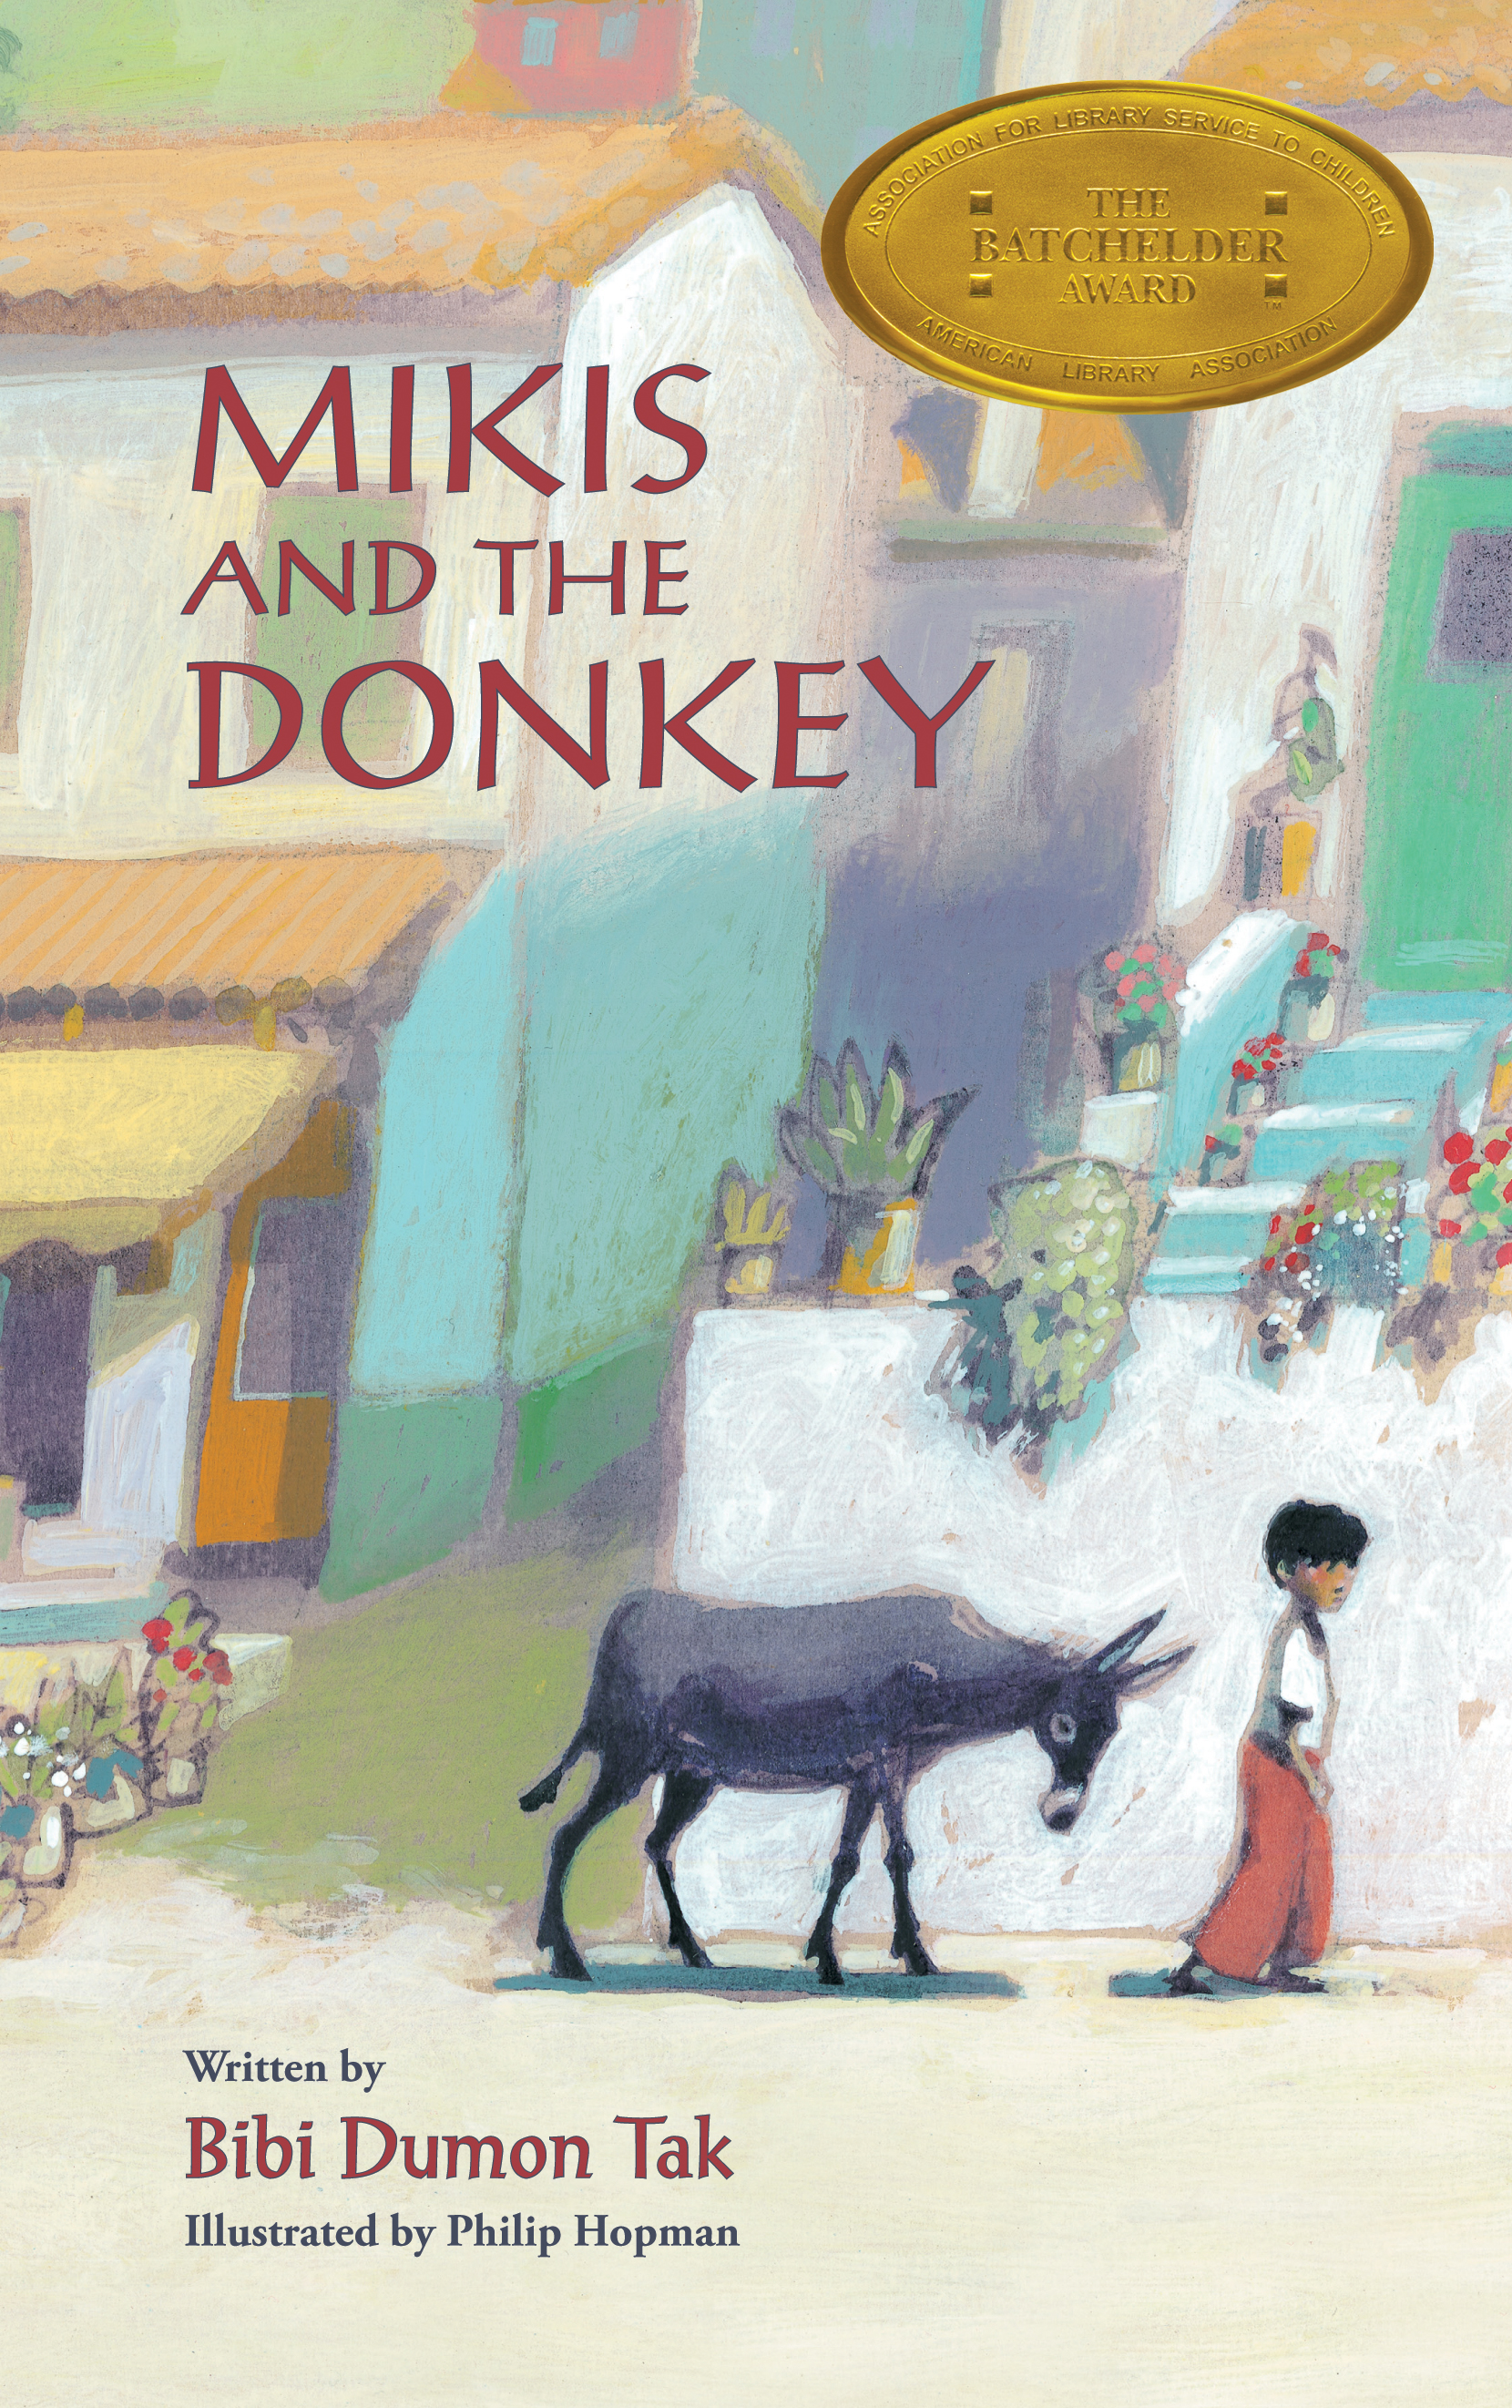 Mikis and the Donkey book cover